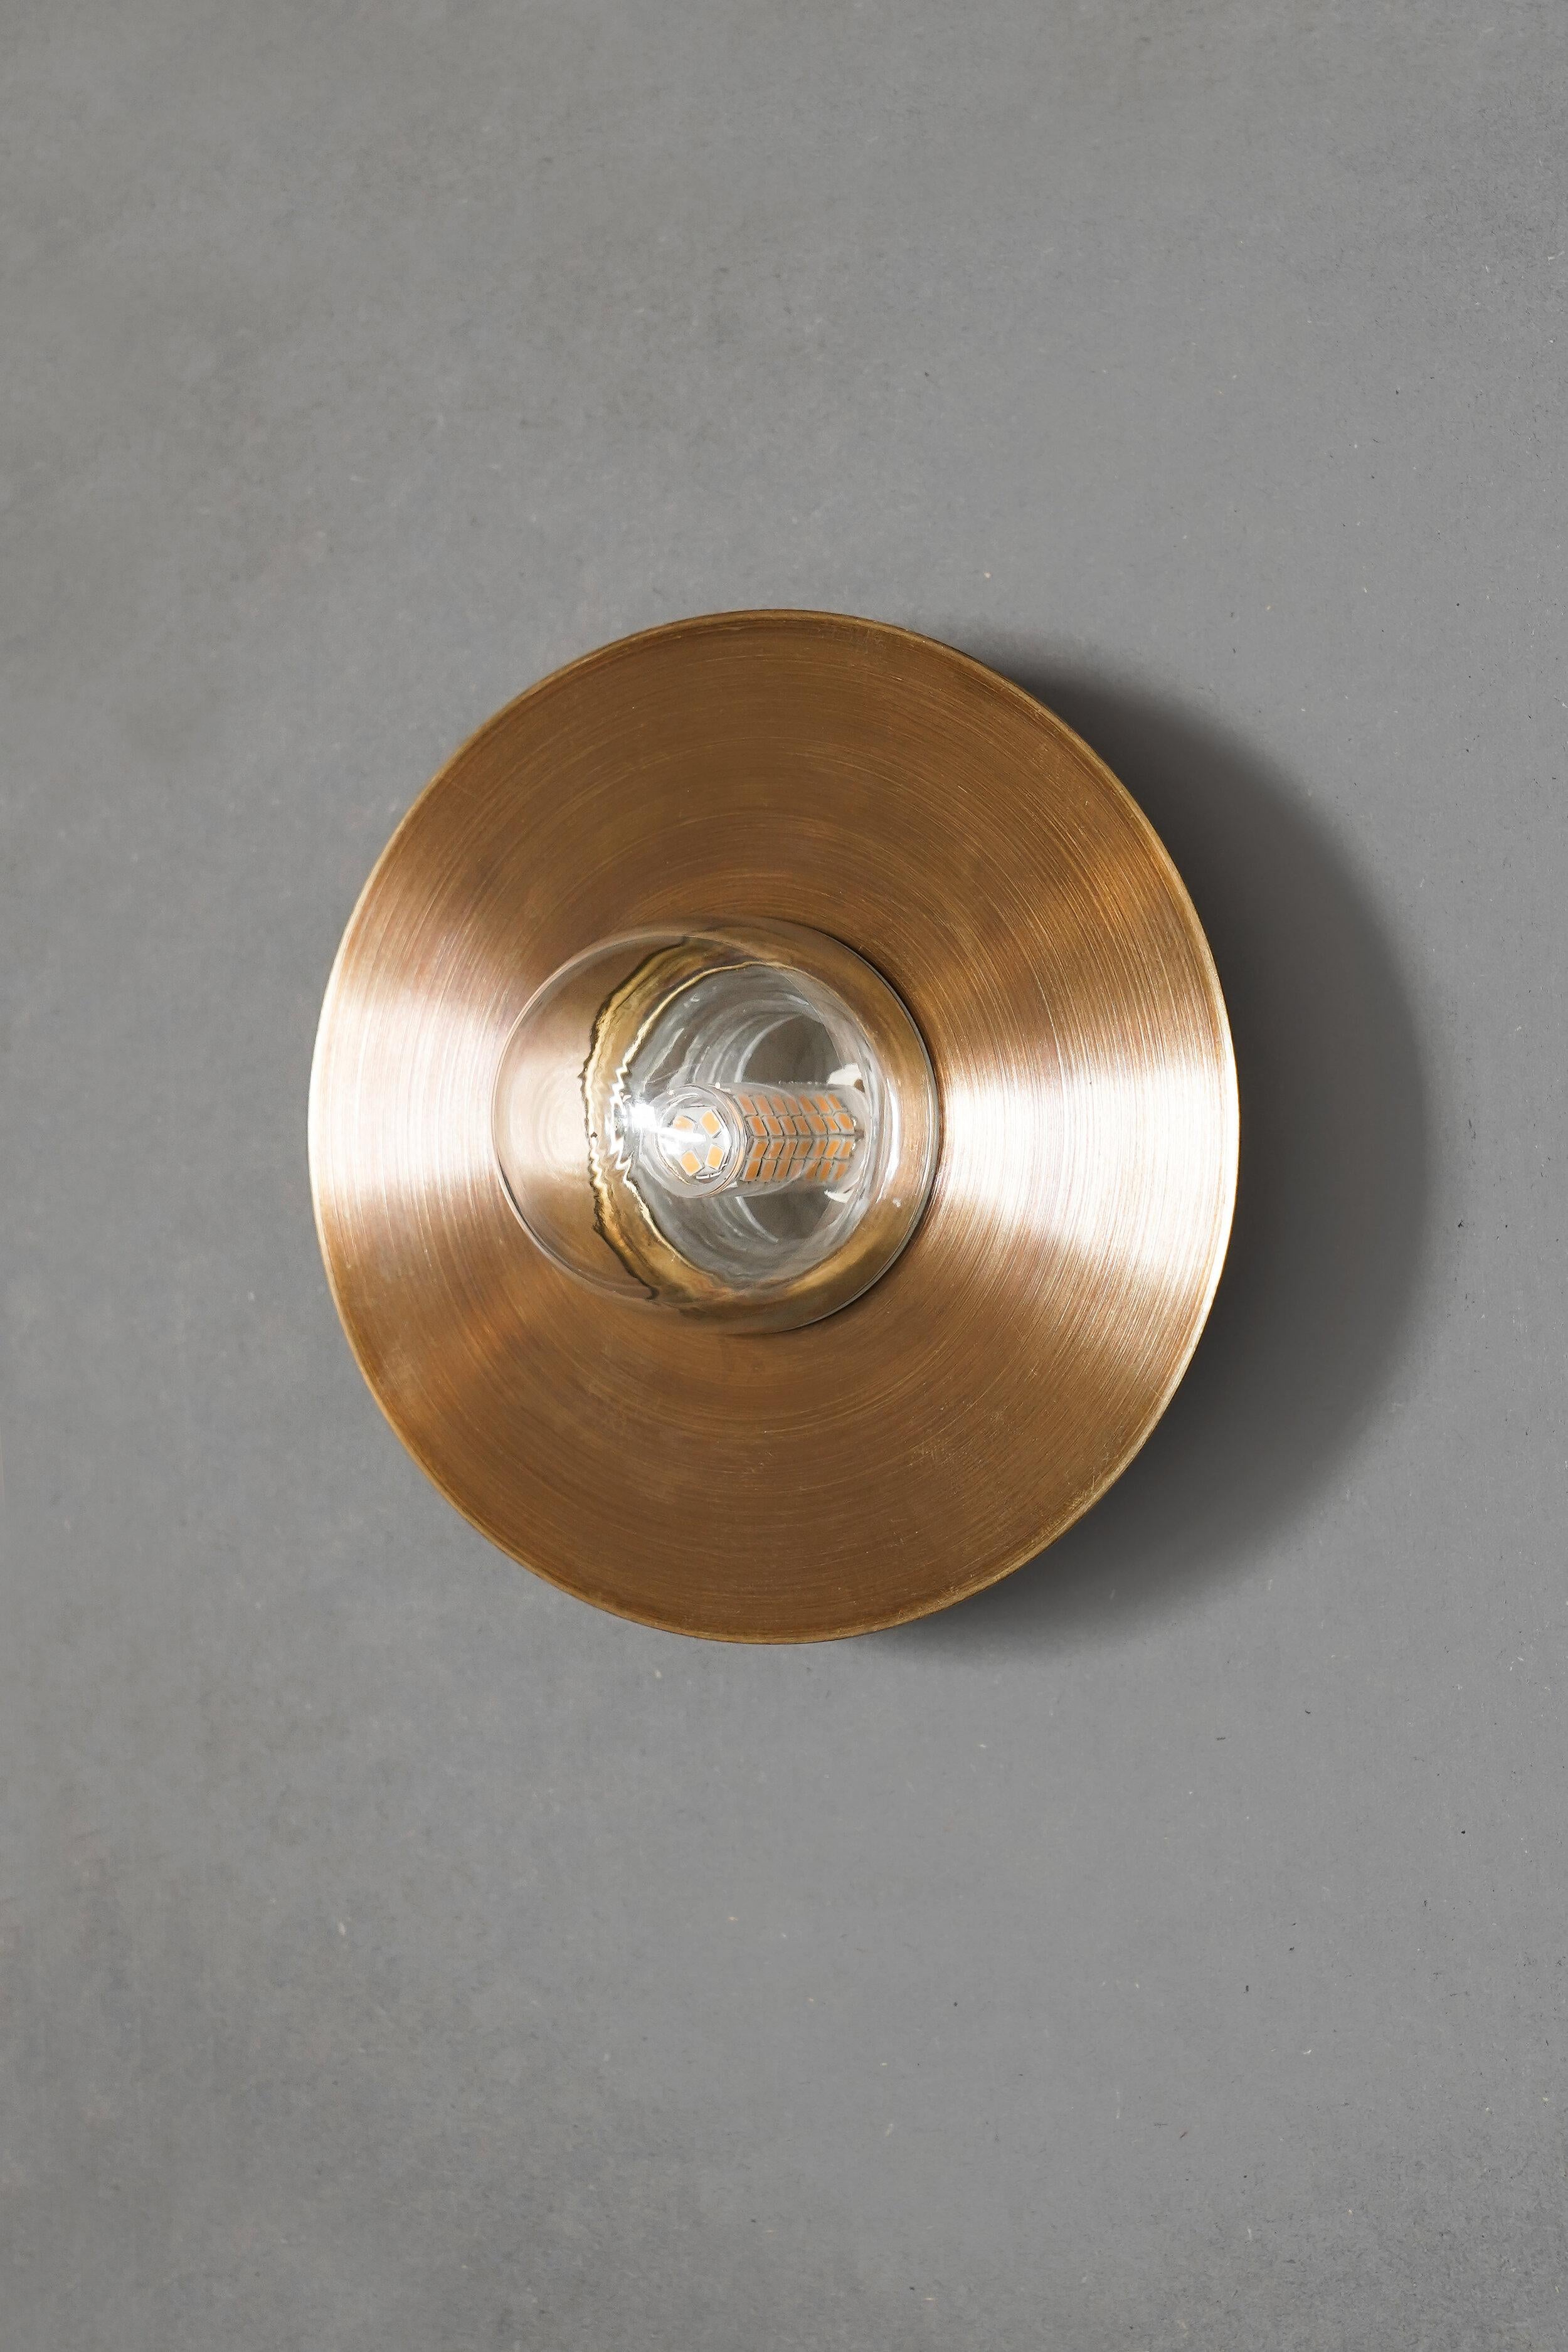 Alba Simple wall light by Contain
Dimensions: D15 x H9.5 cm 
Materials: brass, 3D printed PLA structure and optical lens
Also available in different finishes and dimensions (15 cm Ø x 15 cm Ø x 9,5 cm also available in 22 cm Ø x 22 cm Ø x 9,5